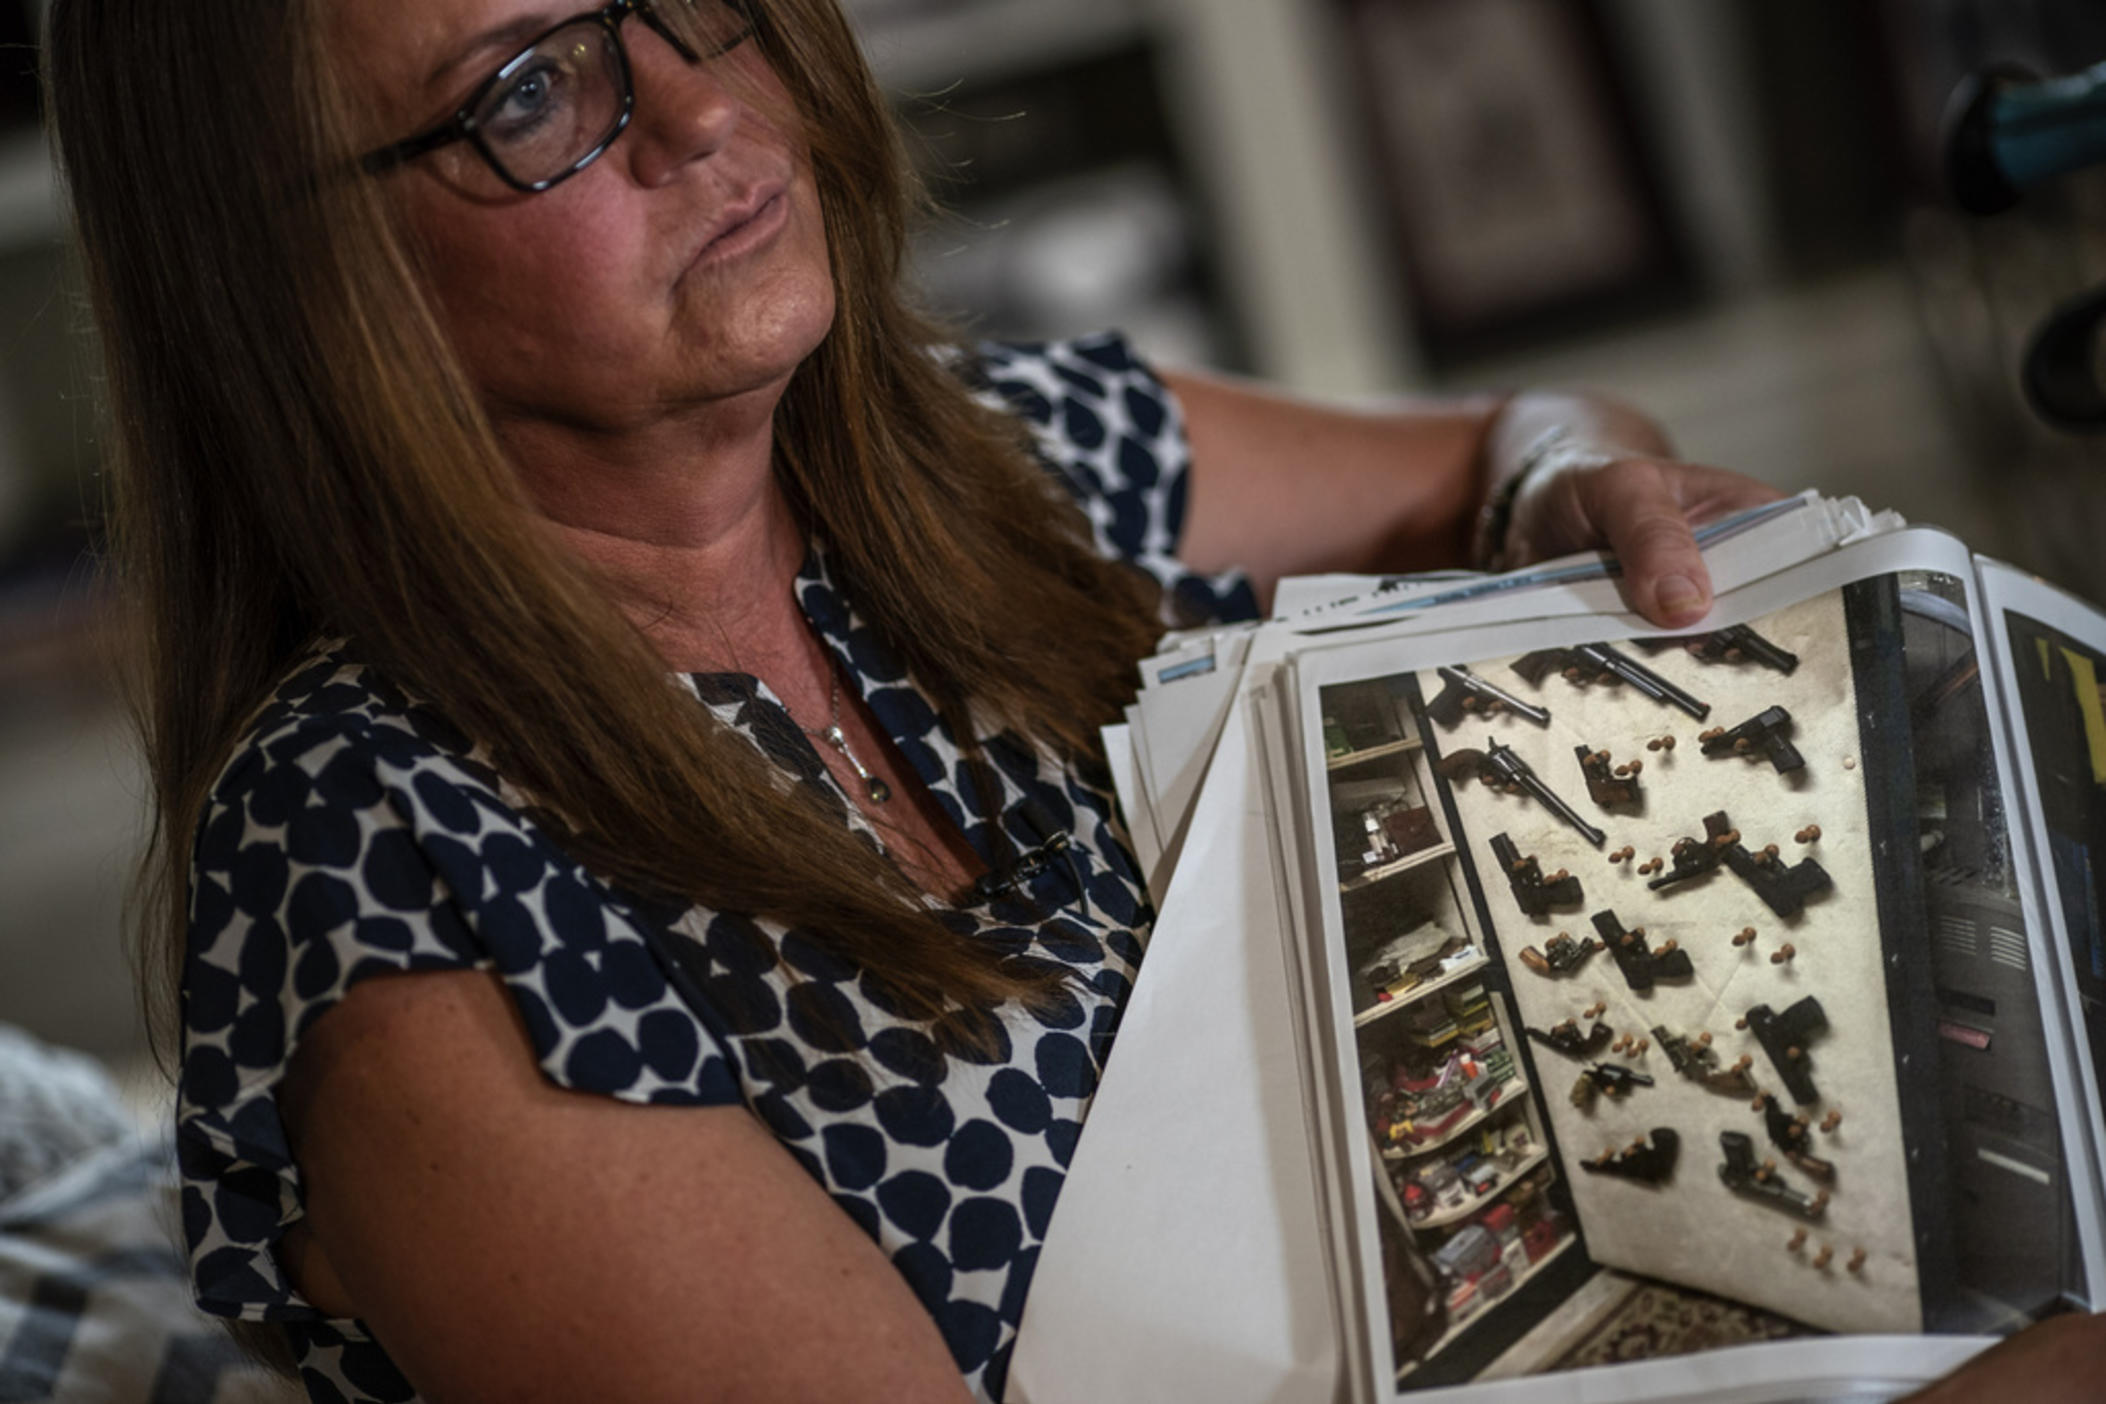 Janet Paulsen shows a photo of some of the dozens of guns that police seized from her estranged husband days before he ambushed her at their home in 2015. Paulsen still lives in the home in Acworth, Ga., Monday, Aug. 7, 2023. “Every step of the way it seemed like his rights were more important … than mine and my children’s,” she says. 